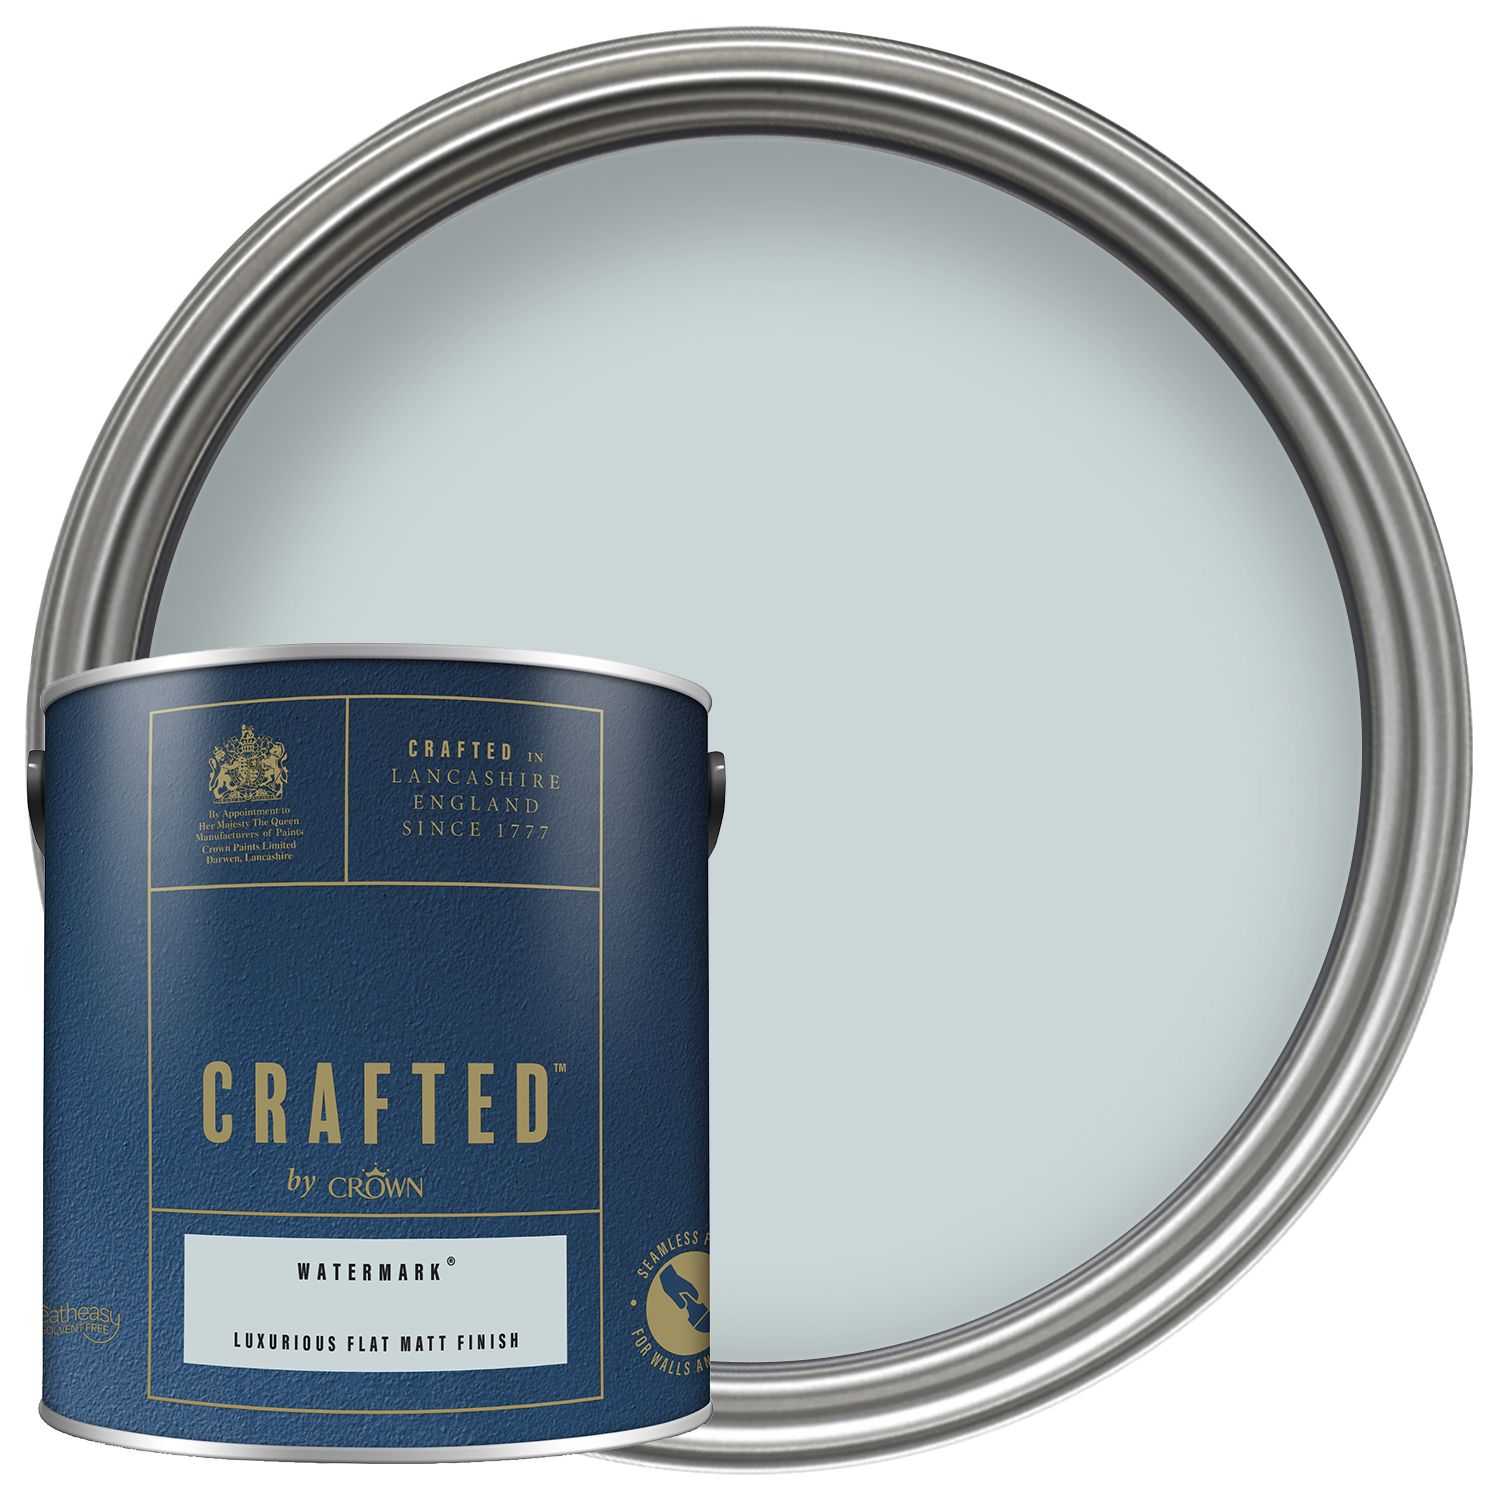 Image of CRAFTED™ by Crown Flat Matt Emulsion Interior Paint - Watermark™ - 2.5L